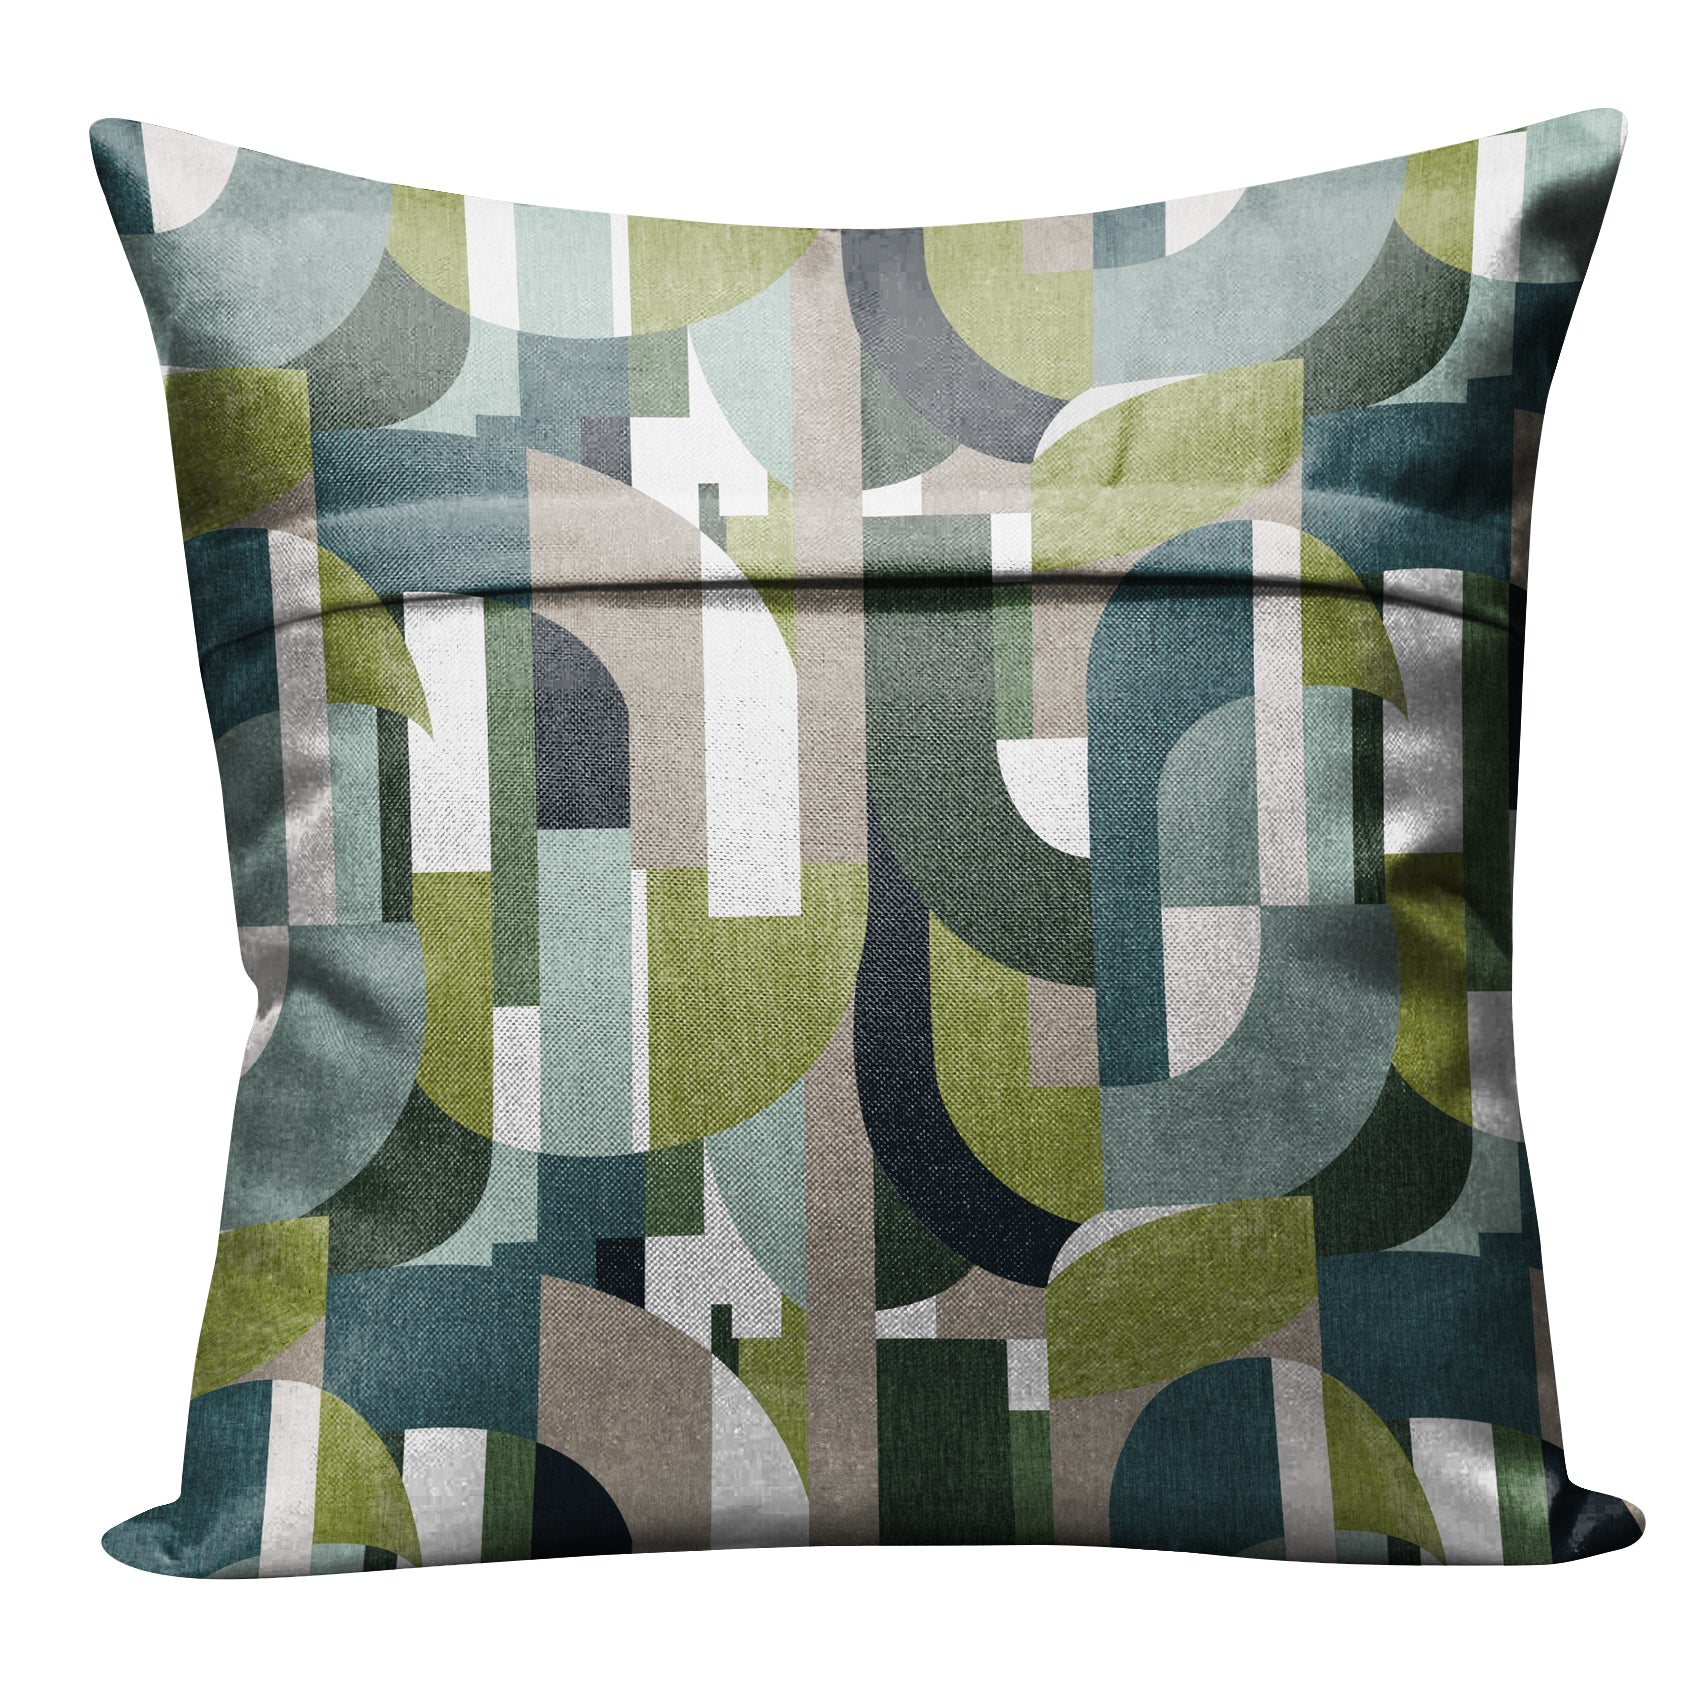 ILLUSION CURVES (16X16 INCH) DIGITAL PRINTED CUSHION COVER TEAL/OLIVE